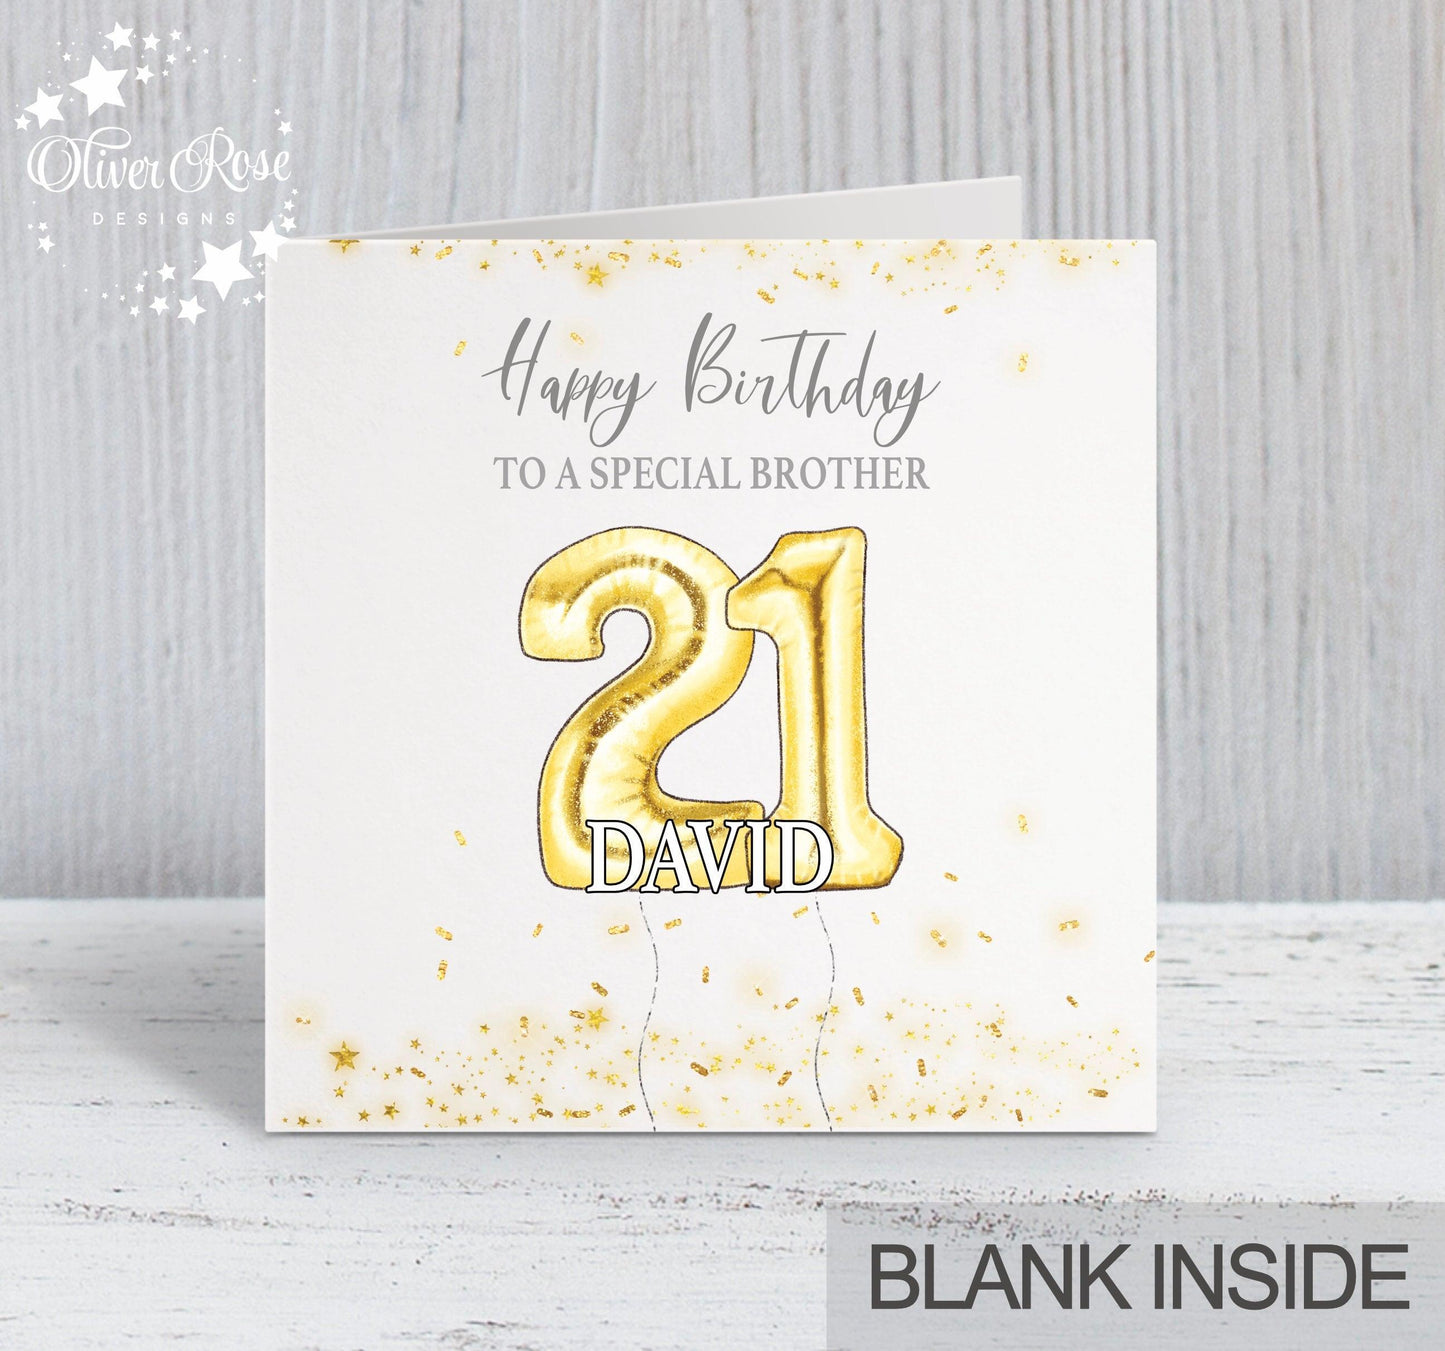 AGE(GOLD) Birthday Card, 21st Birthday Card, Printed Gold Effect, Brother